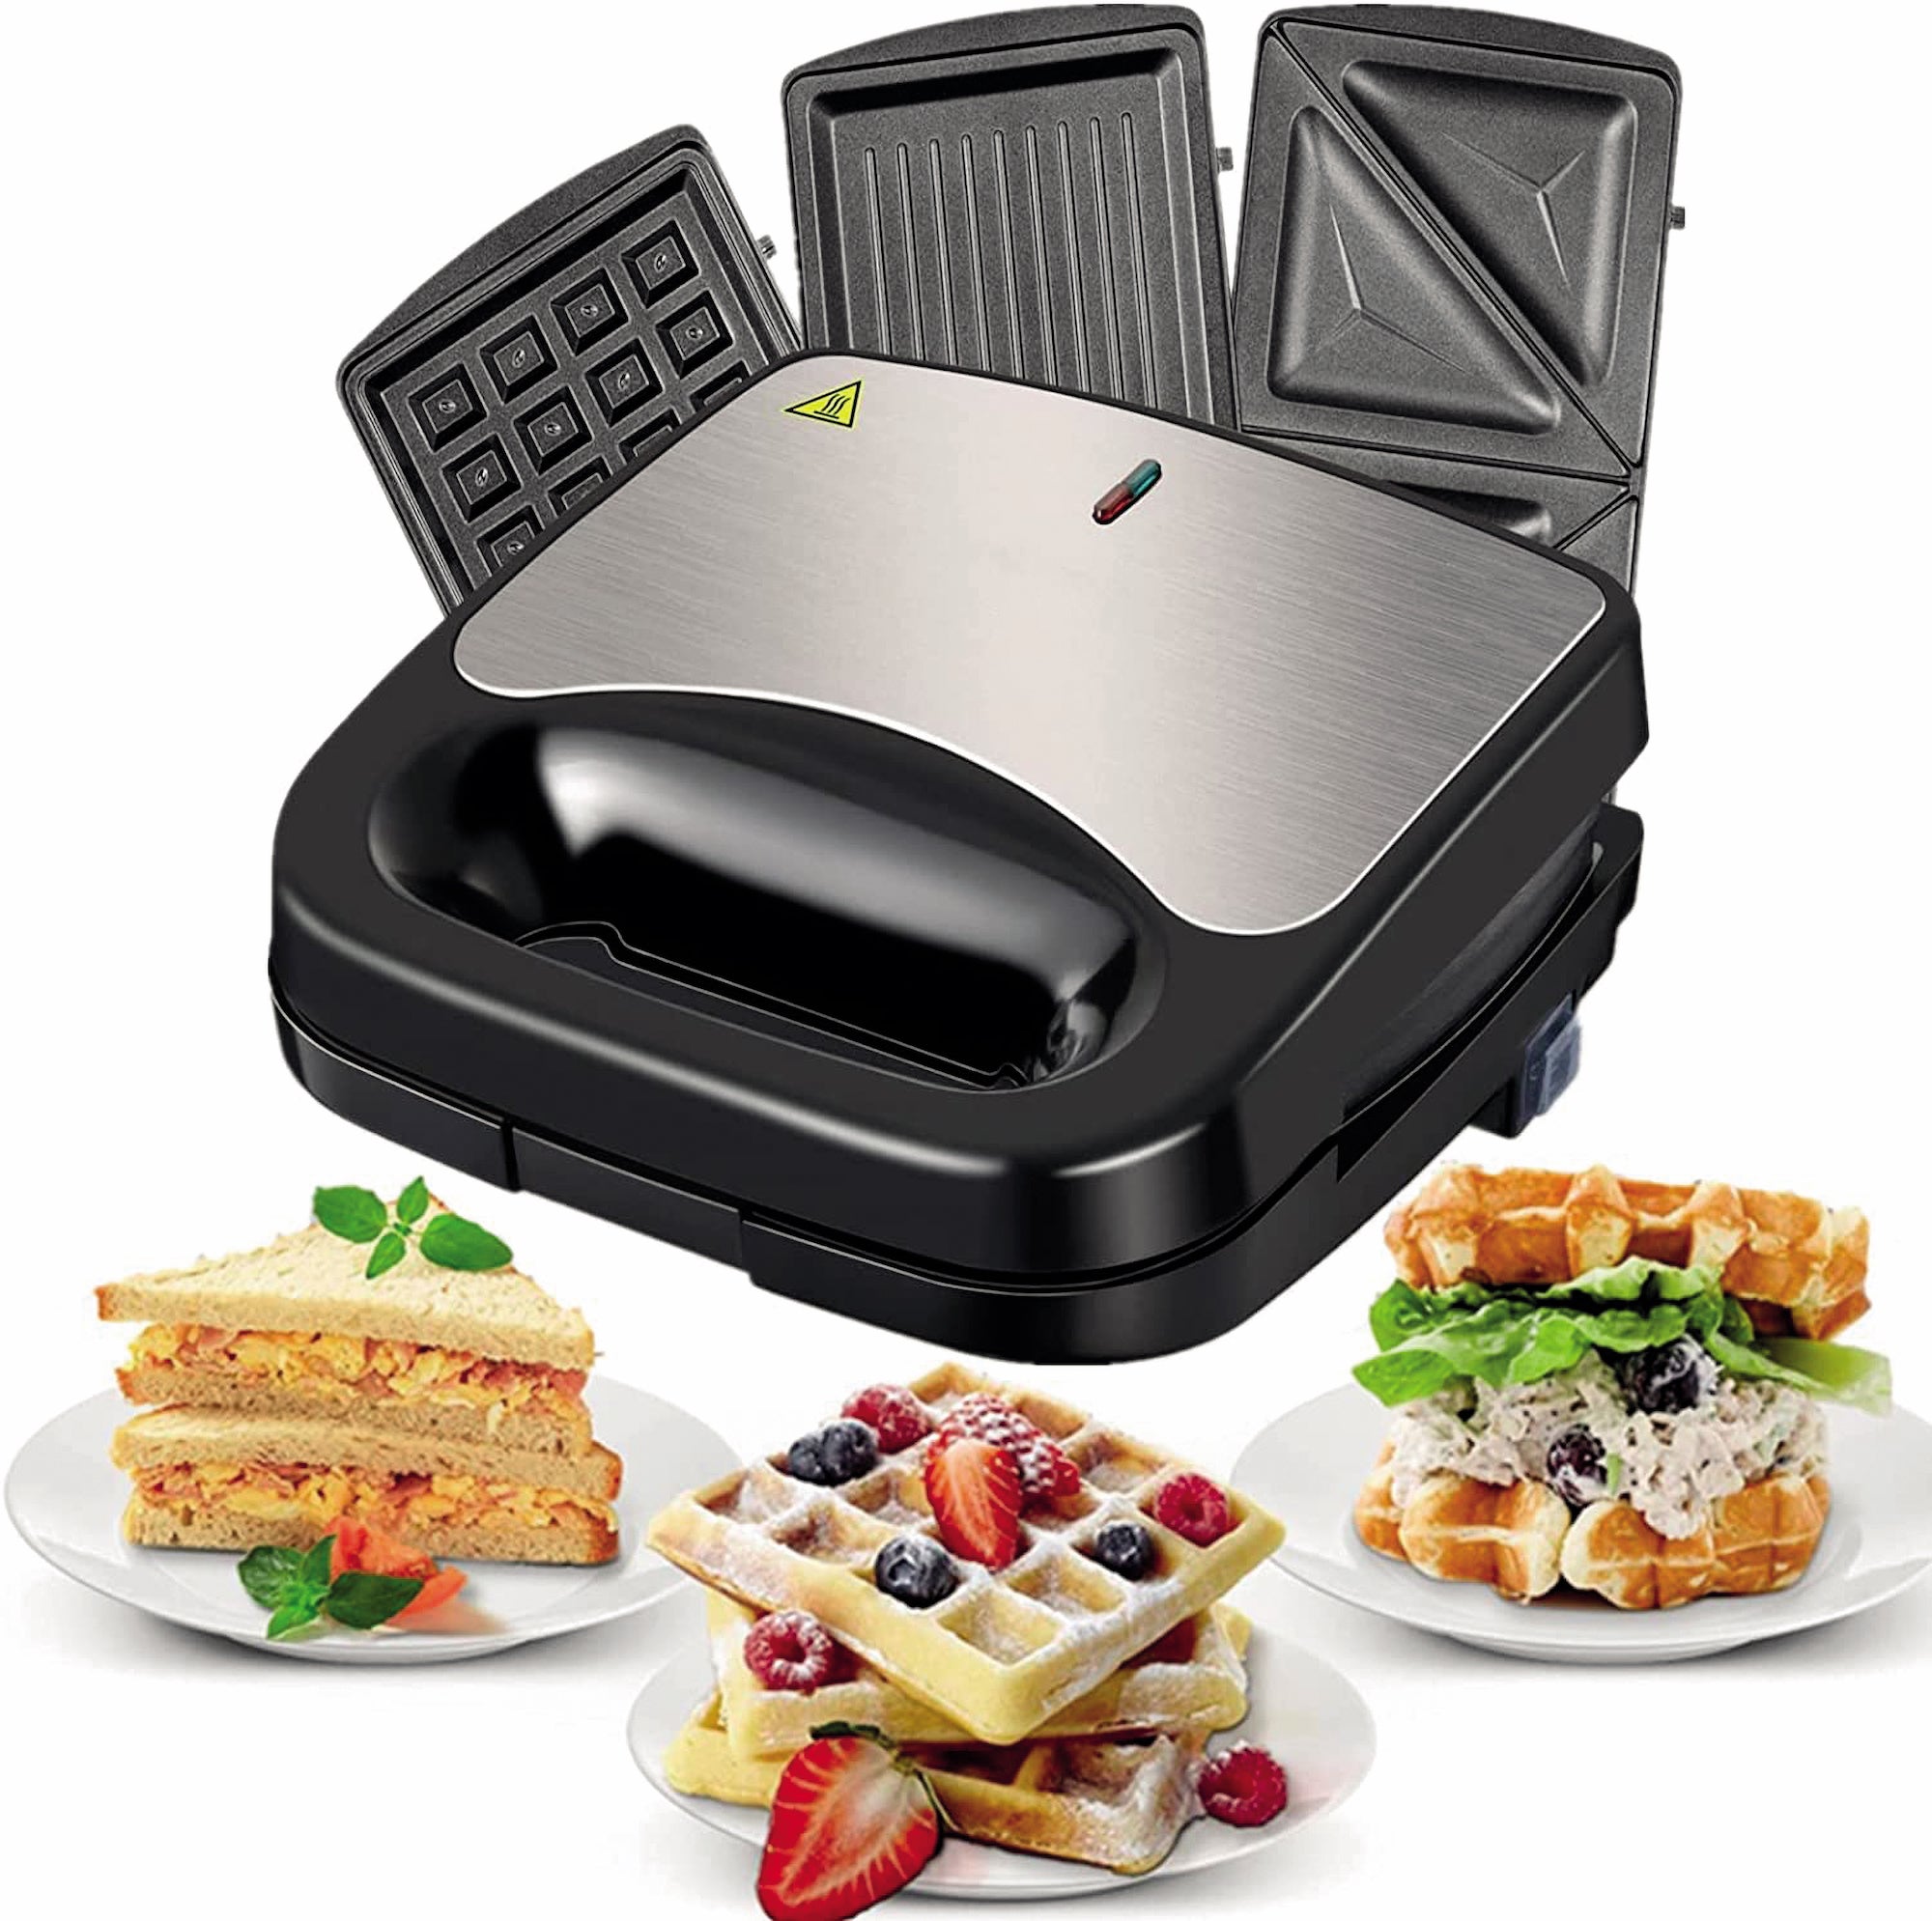 3 in 1 Sandwich Toaster, Waffle Maker and Grill